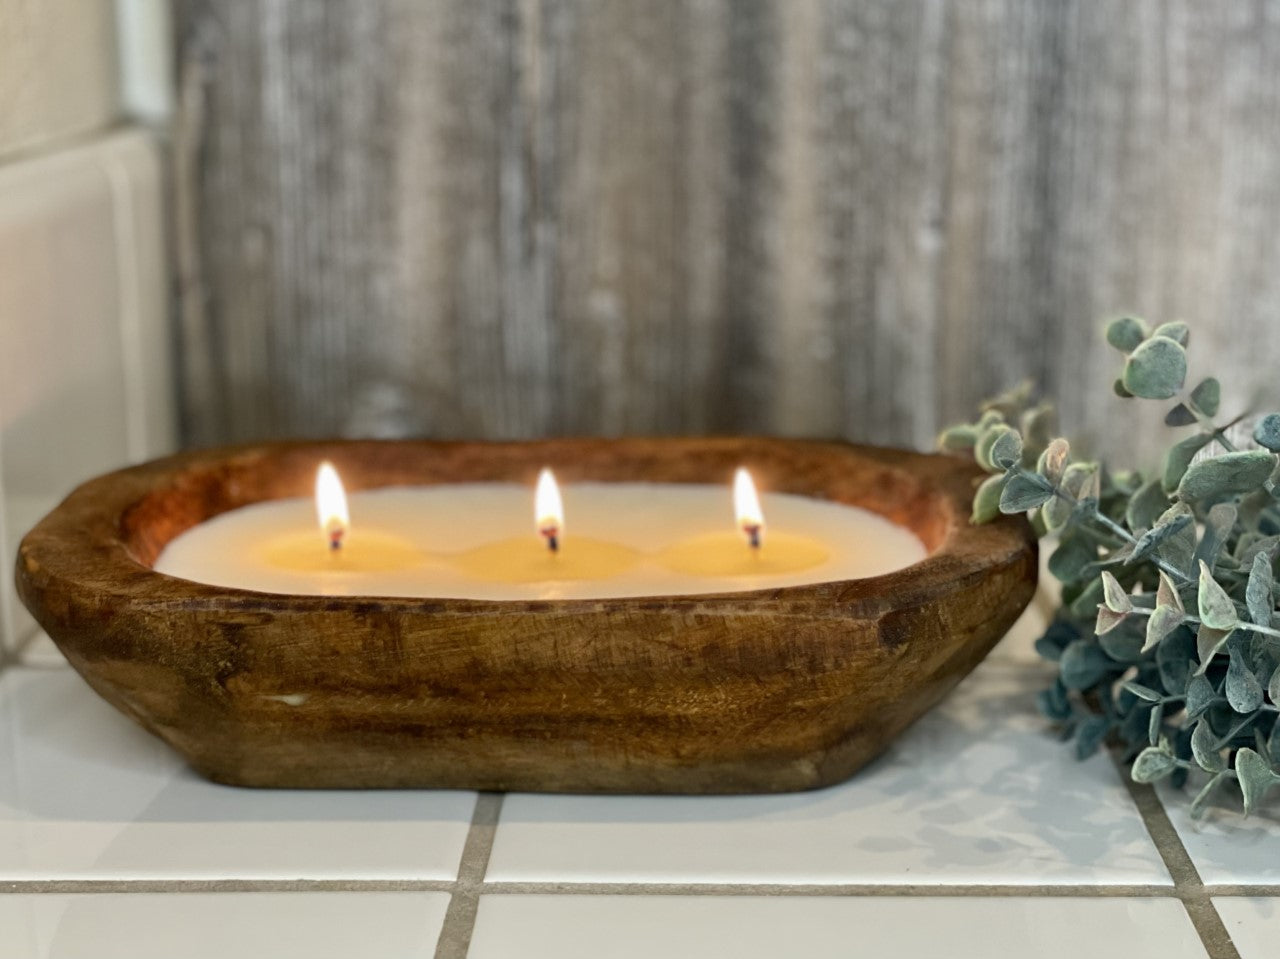 Orange Peel & Spice Scented - Wooden Bowl Candle